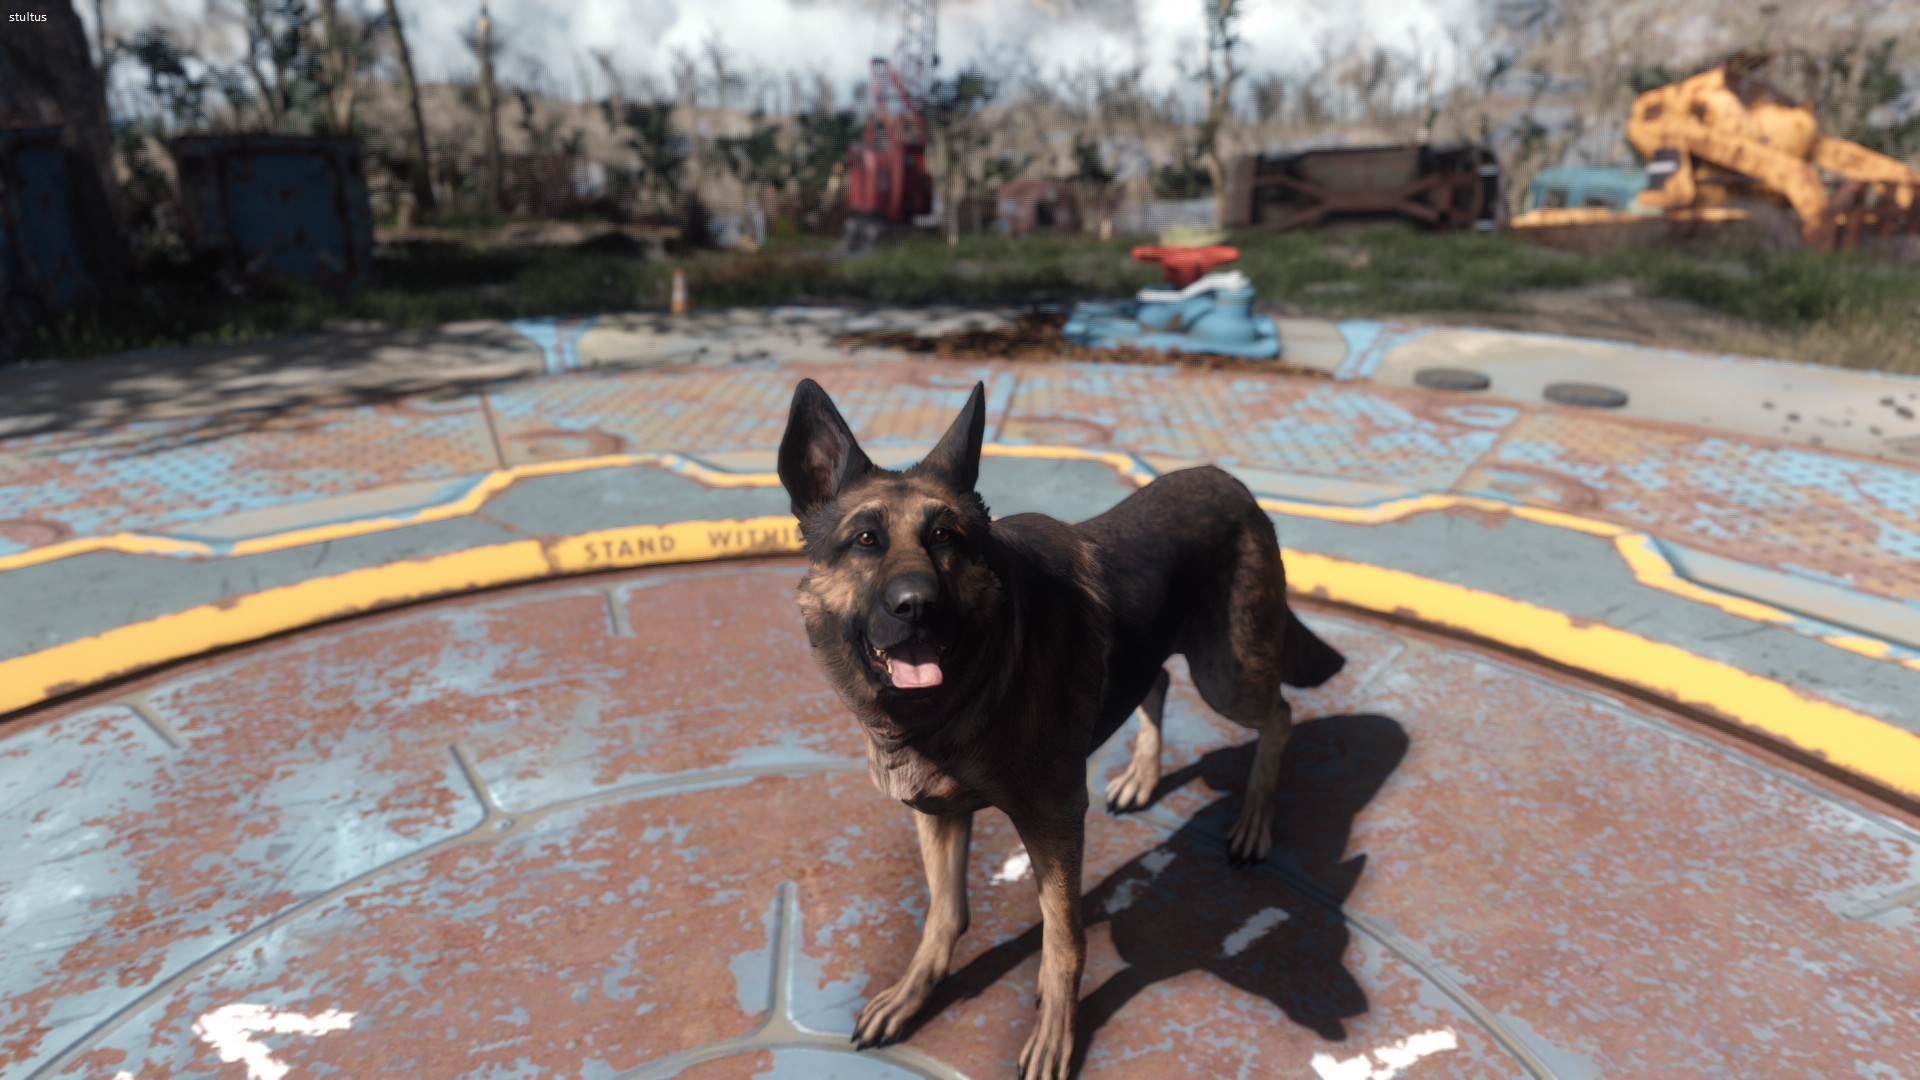 fallout 4 dog found something